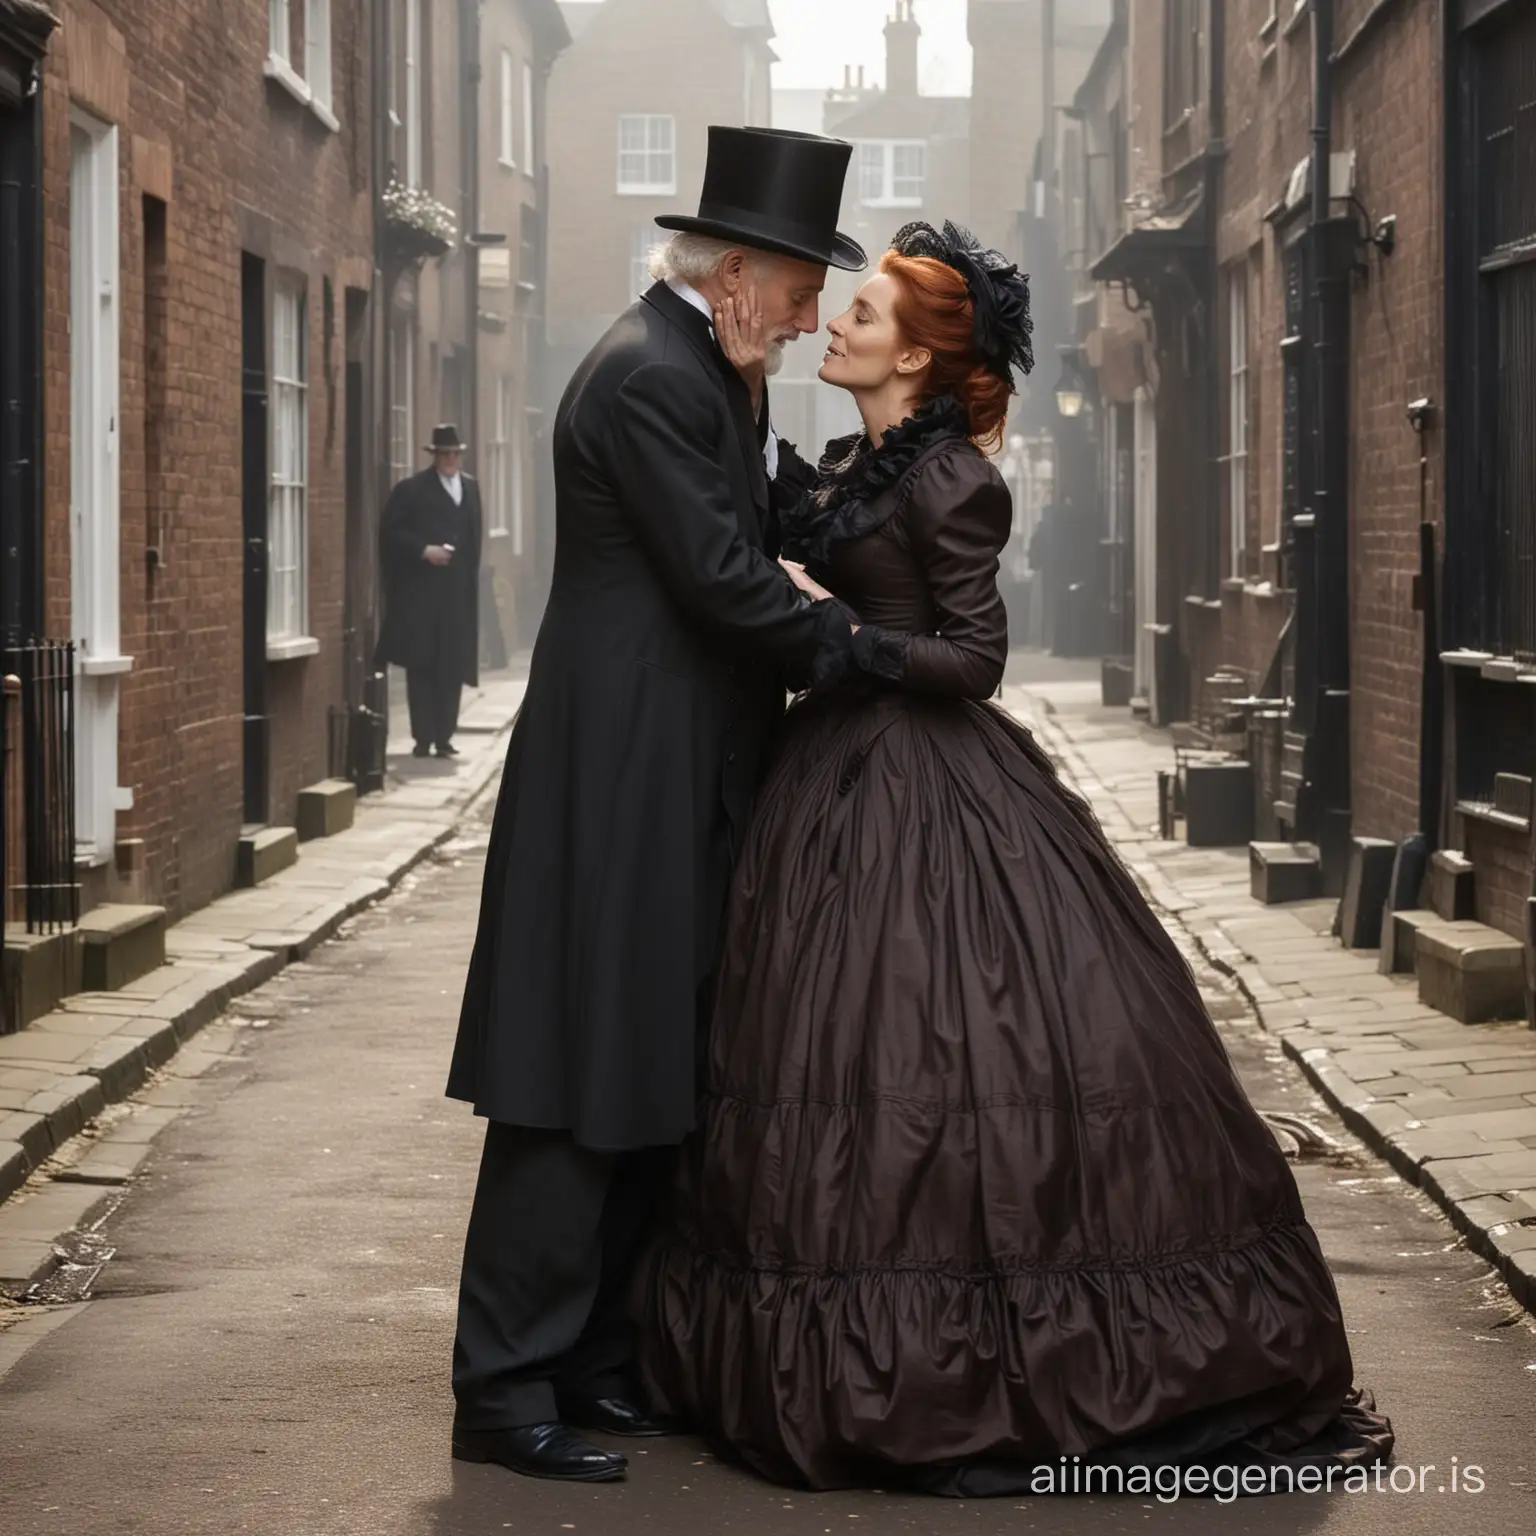 red hair Gillian Anderson wearing a dark chocolate floor-length loose billowing 1860 Victorian crinoline poofy dress with a frilly bonnet on Victorian era street kissing lovingly an old man dressed into a black Victorian suit who seems to be her dear husband